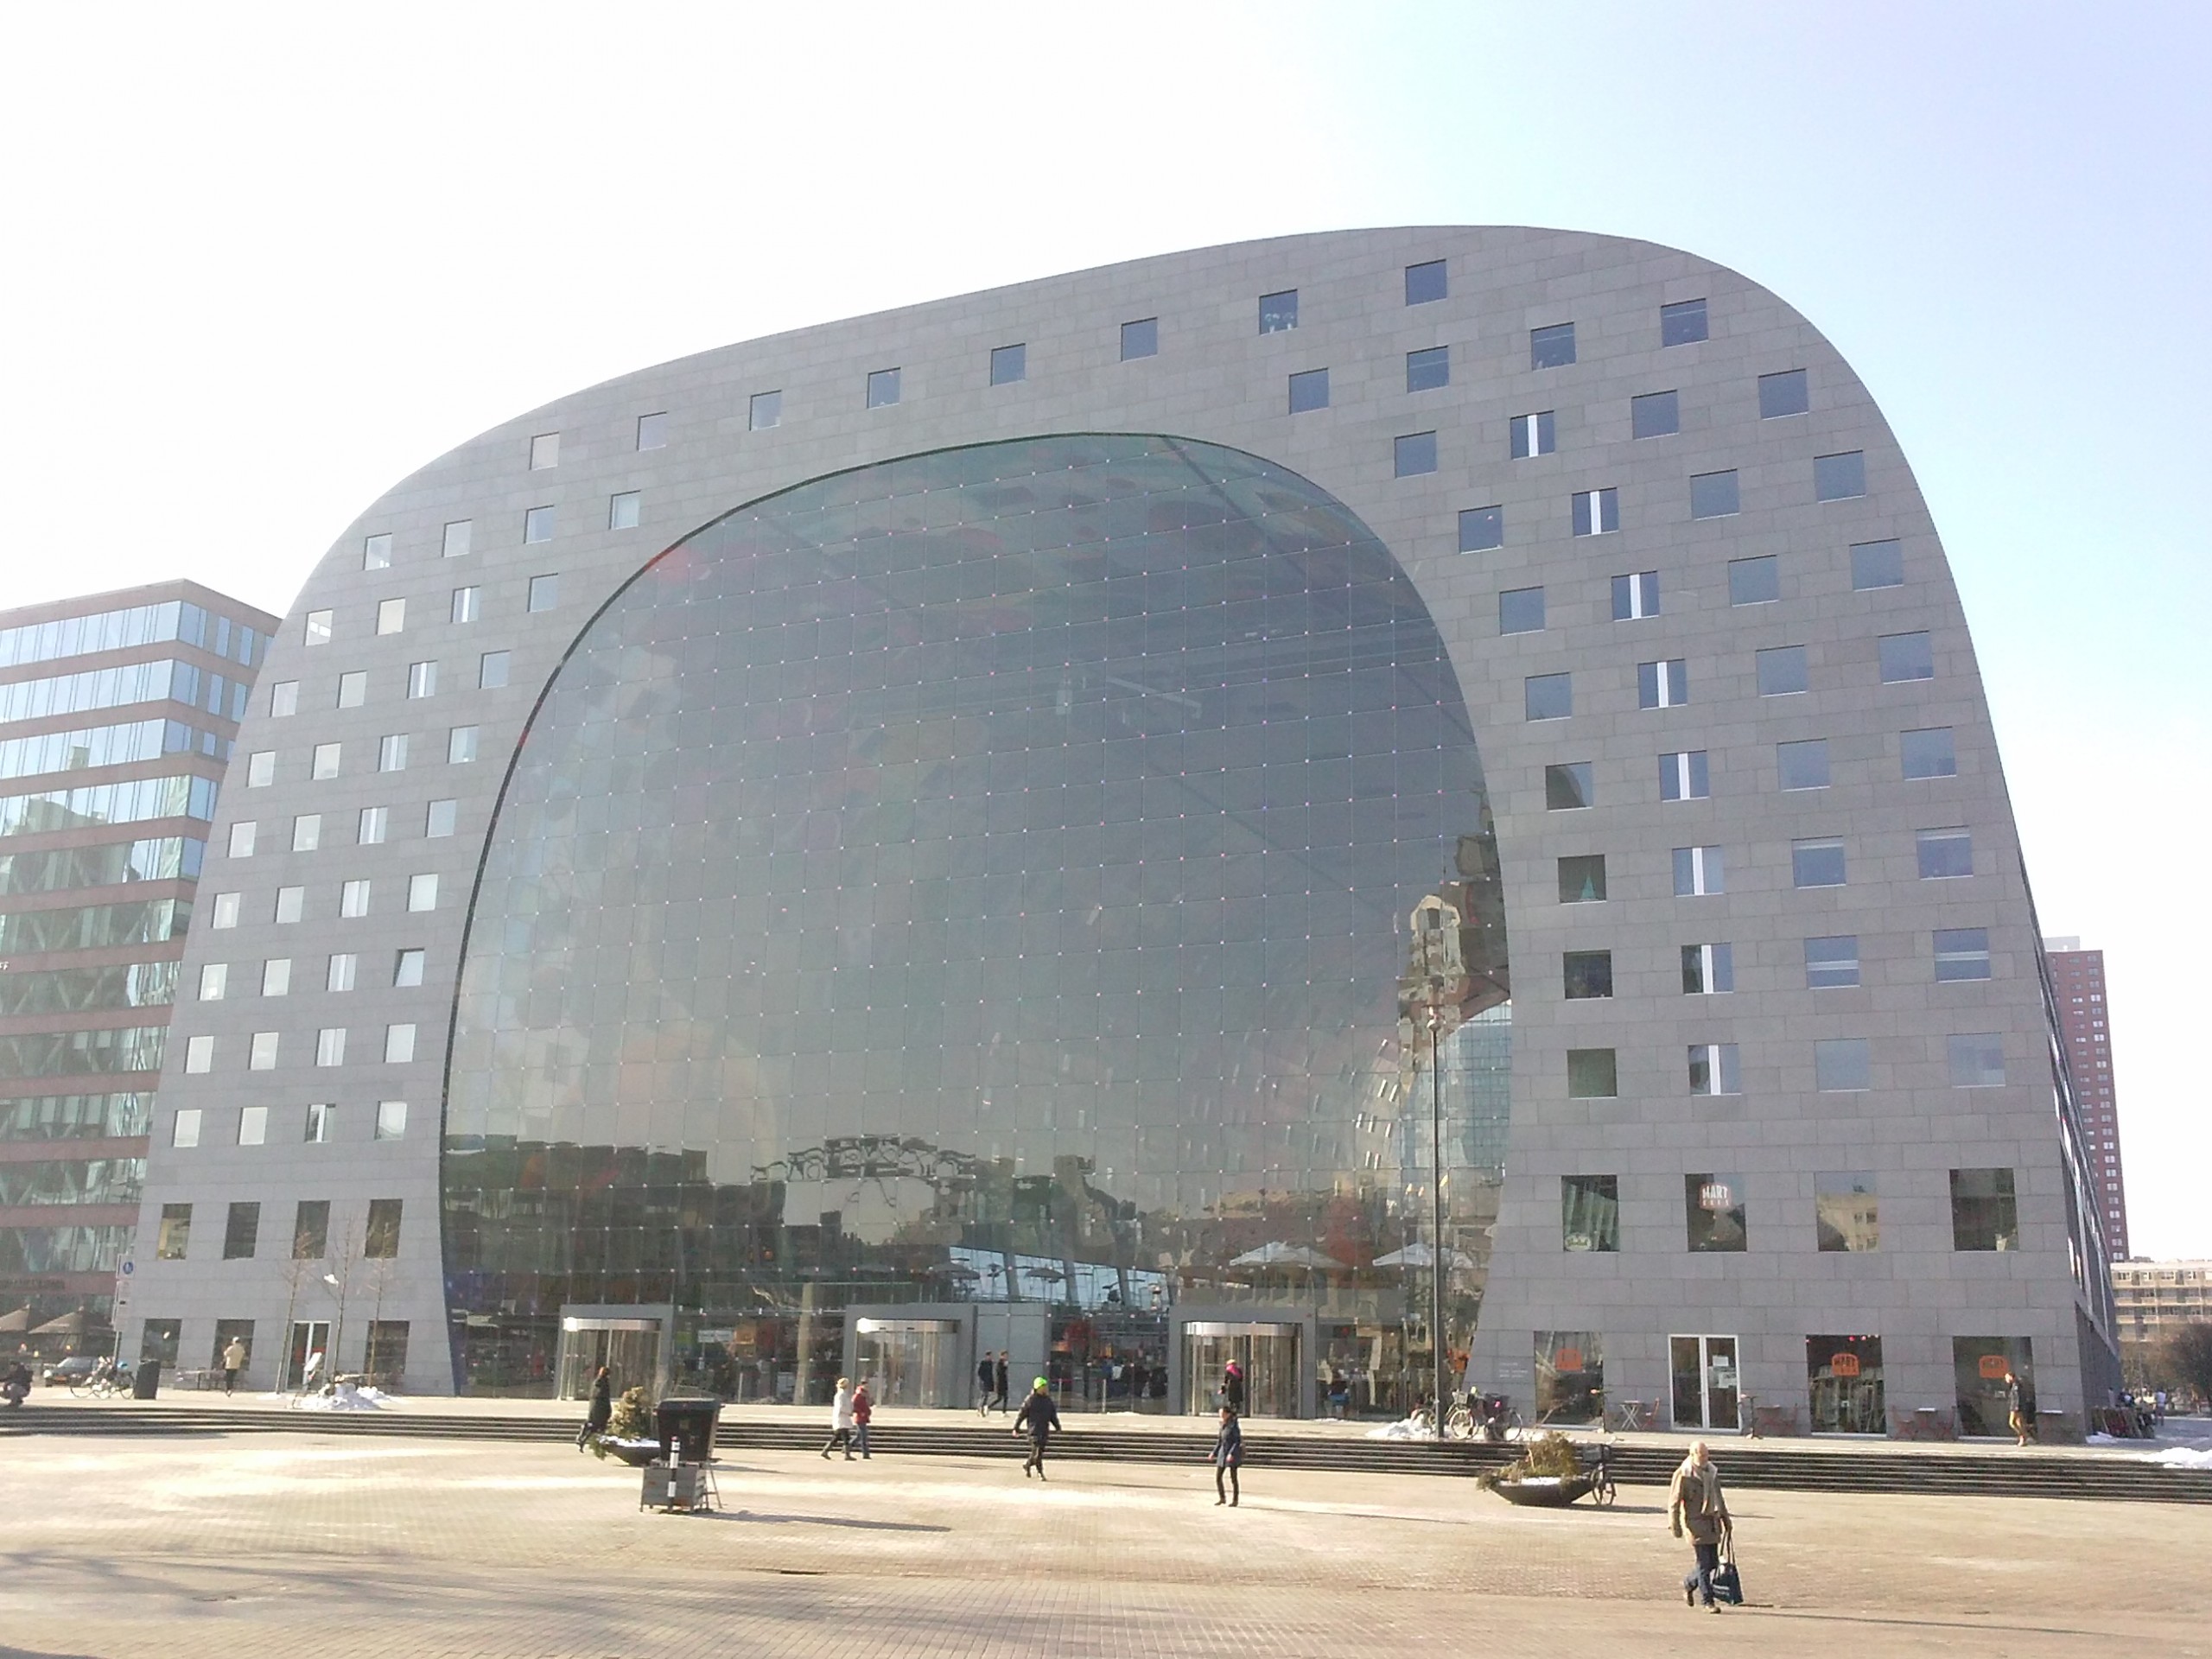 The Markthal as seen from the Binnenrotte, Rotterdam center